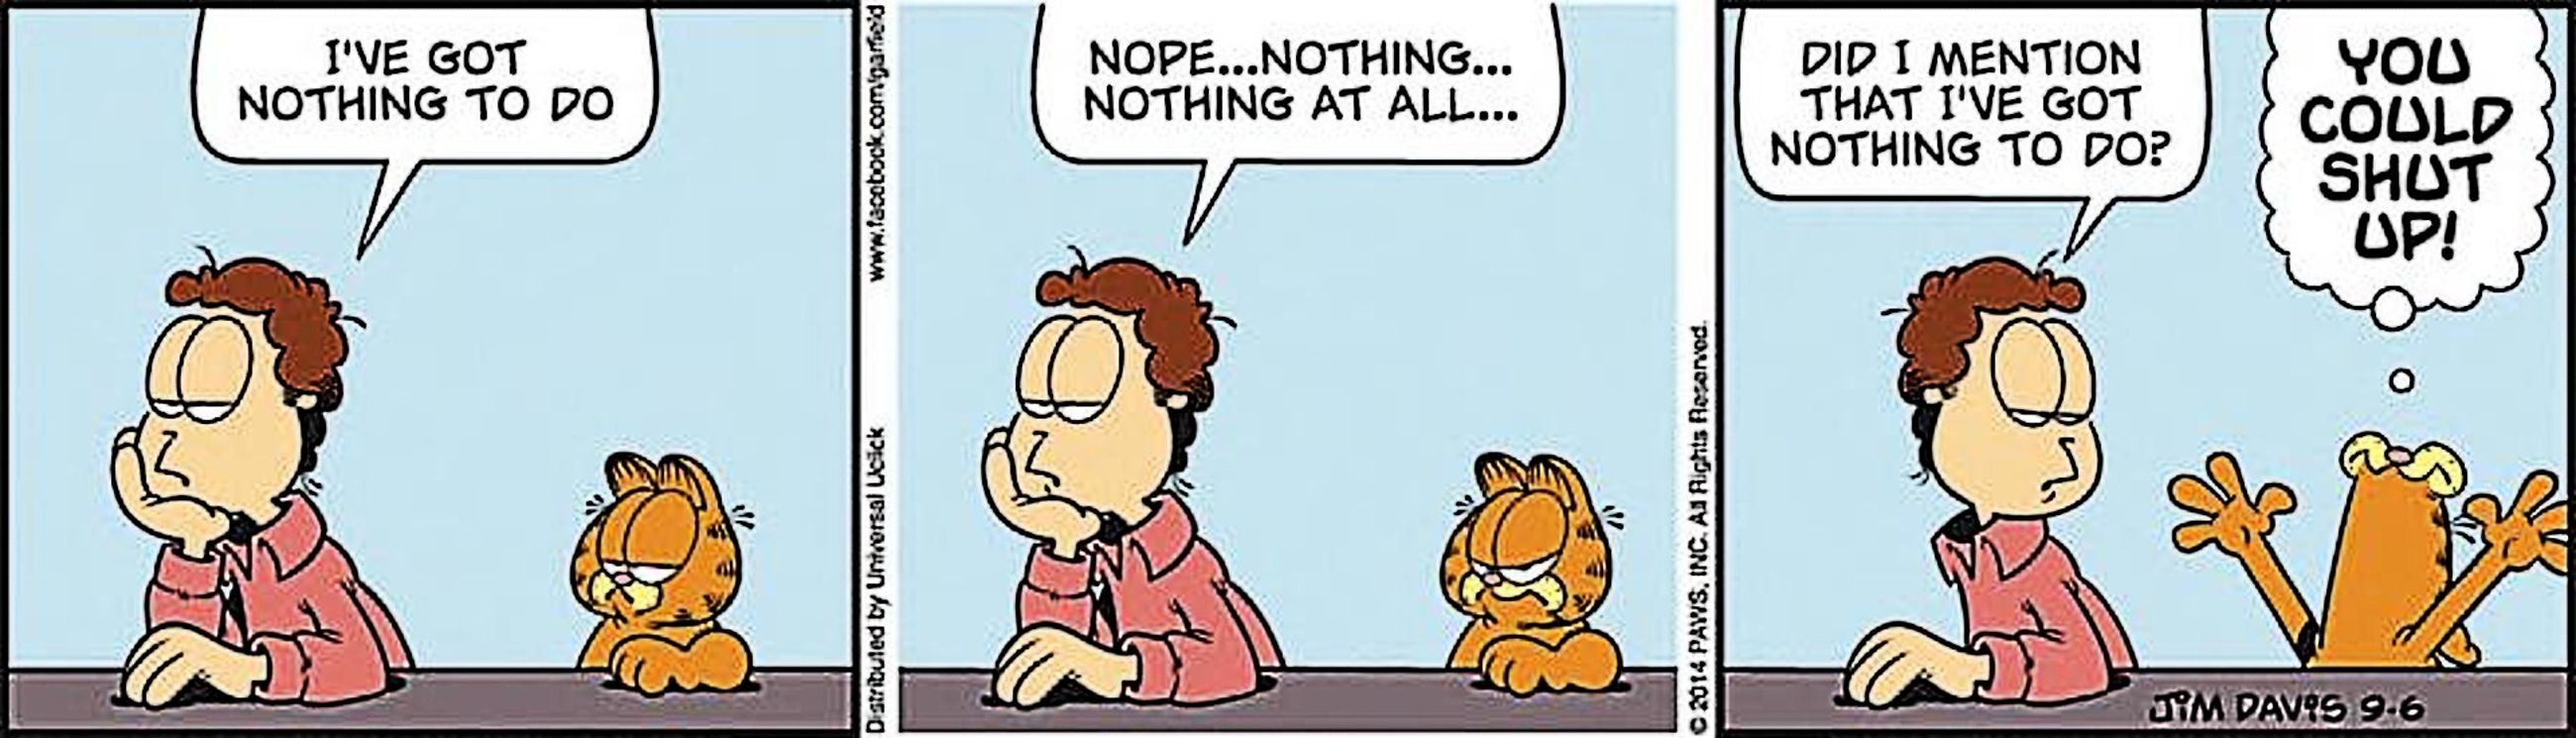 Jon Arbuckle repeatedly says he has nothing to do, Garfield says: 